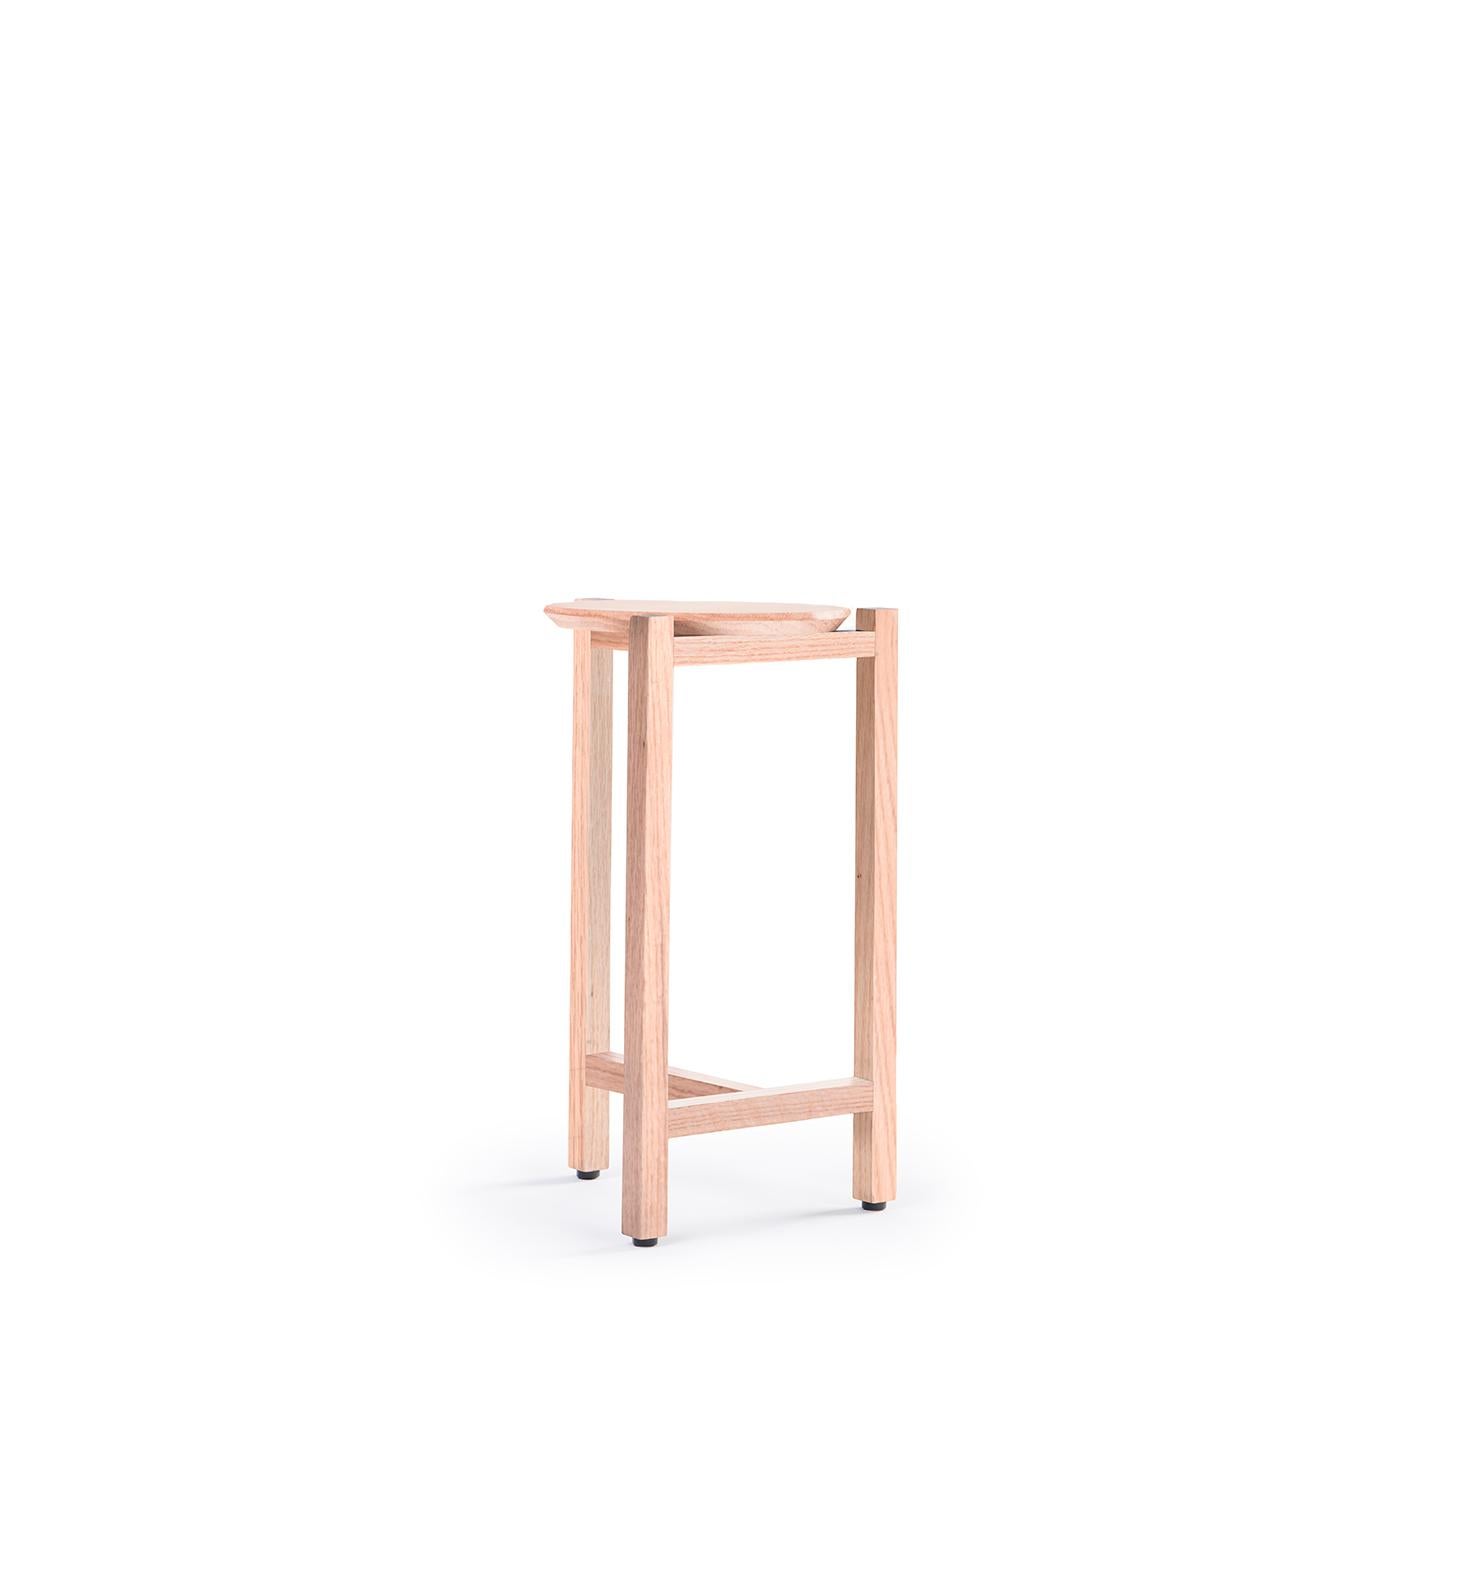 Introducing the Mesa Auxiliar A, a Mexican contemporary side table designed by Emiliano Molina for CUCHARA. 
This table is the perfect solution for anyone looking for a useful surface to place next to their sofa. With its sleek design and practical